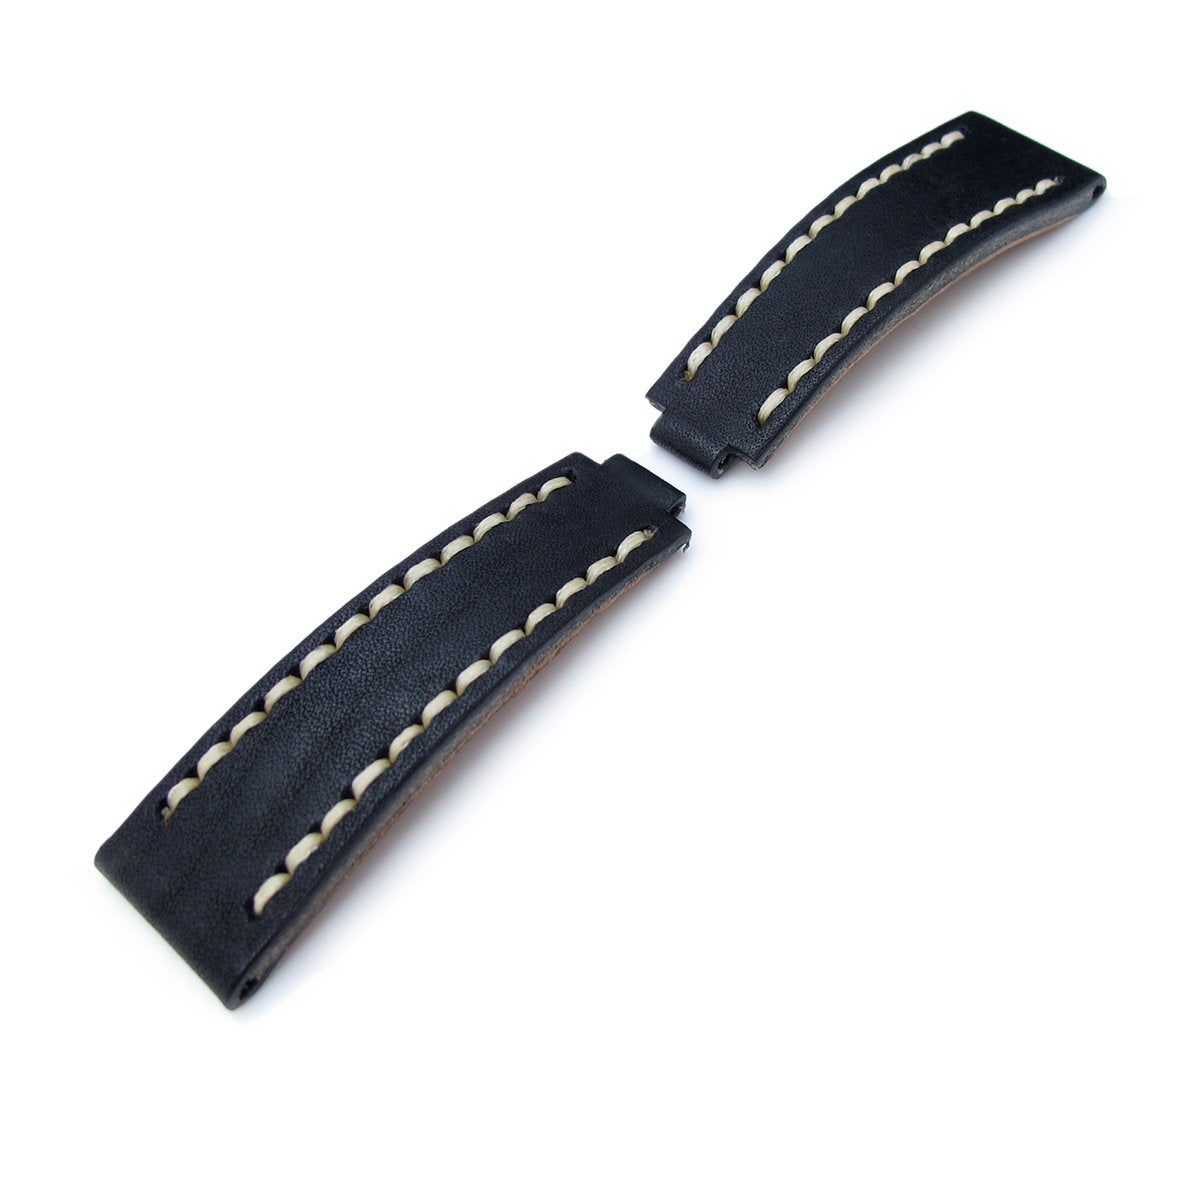 20mm MiLTAT RX Collection Watch Strap NERO Black Genuine Calf Beige St. Tailor-made for RX SUB & EXP Strapcode Watch Bands